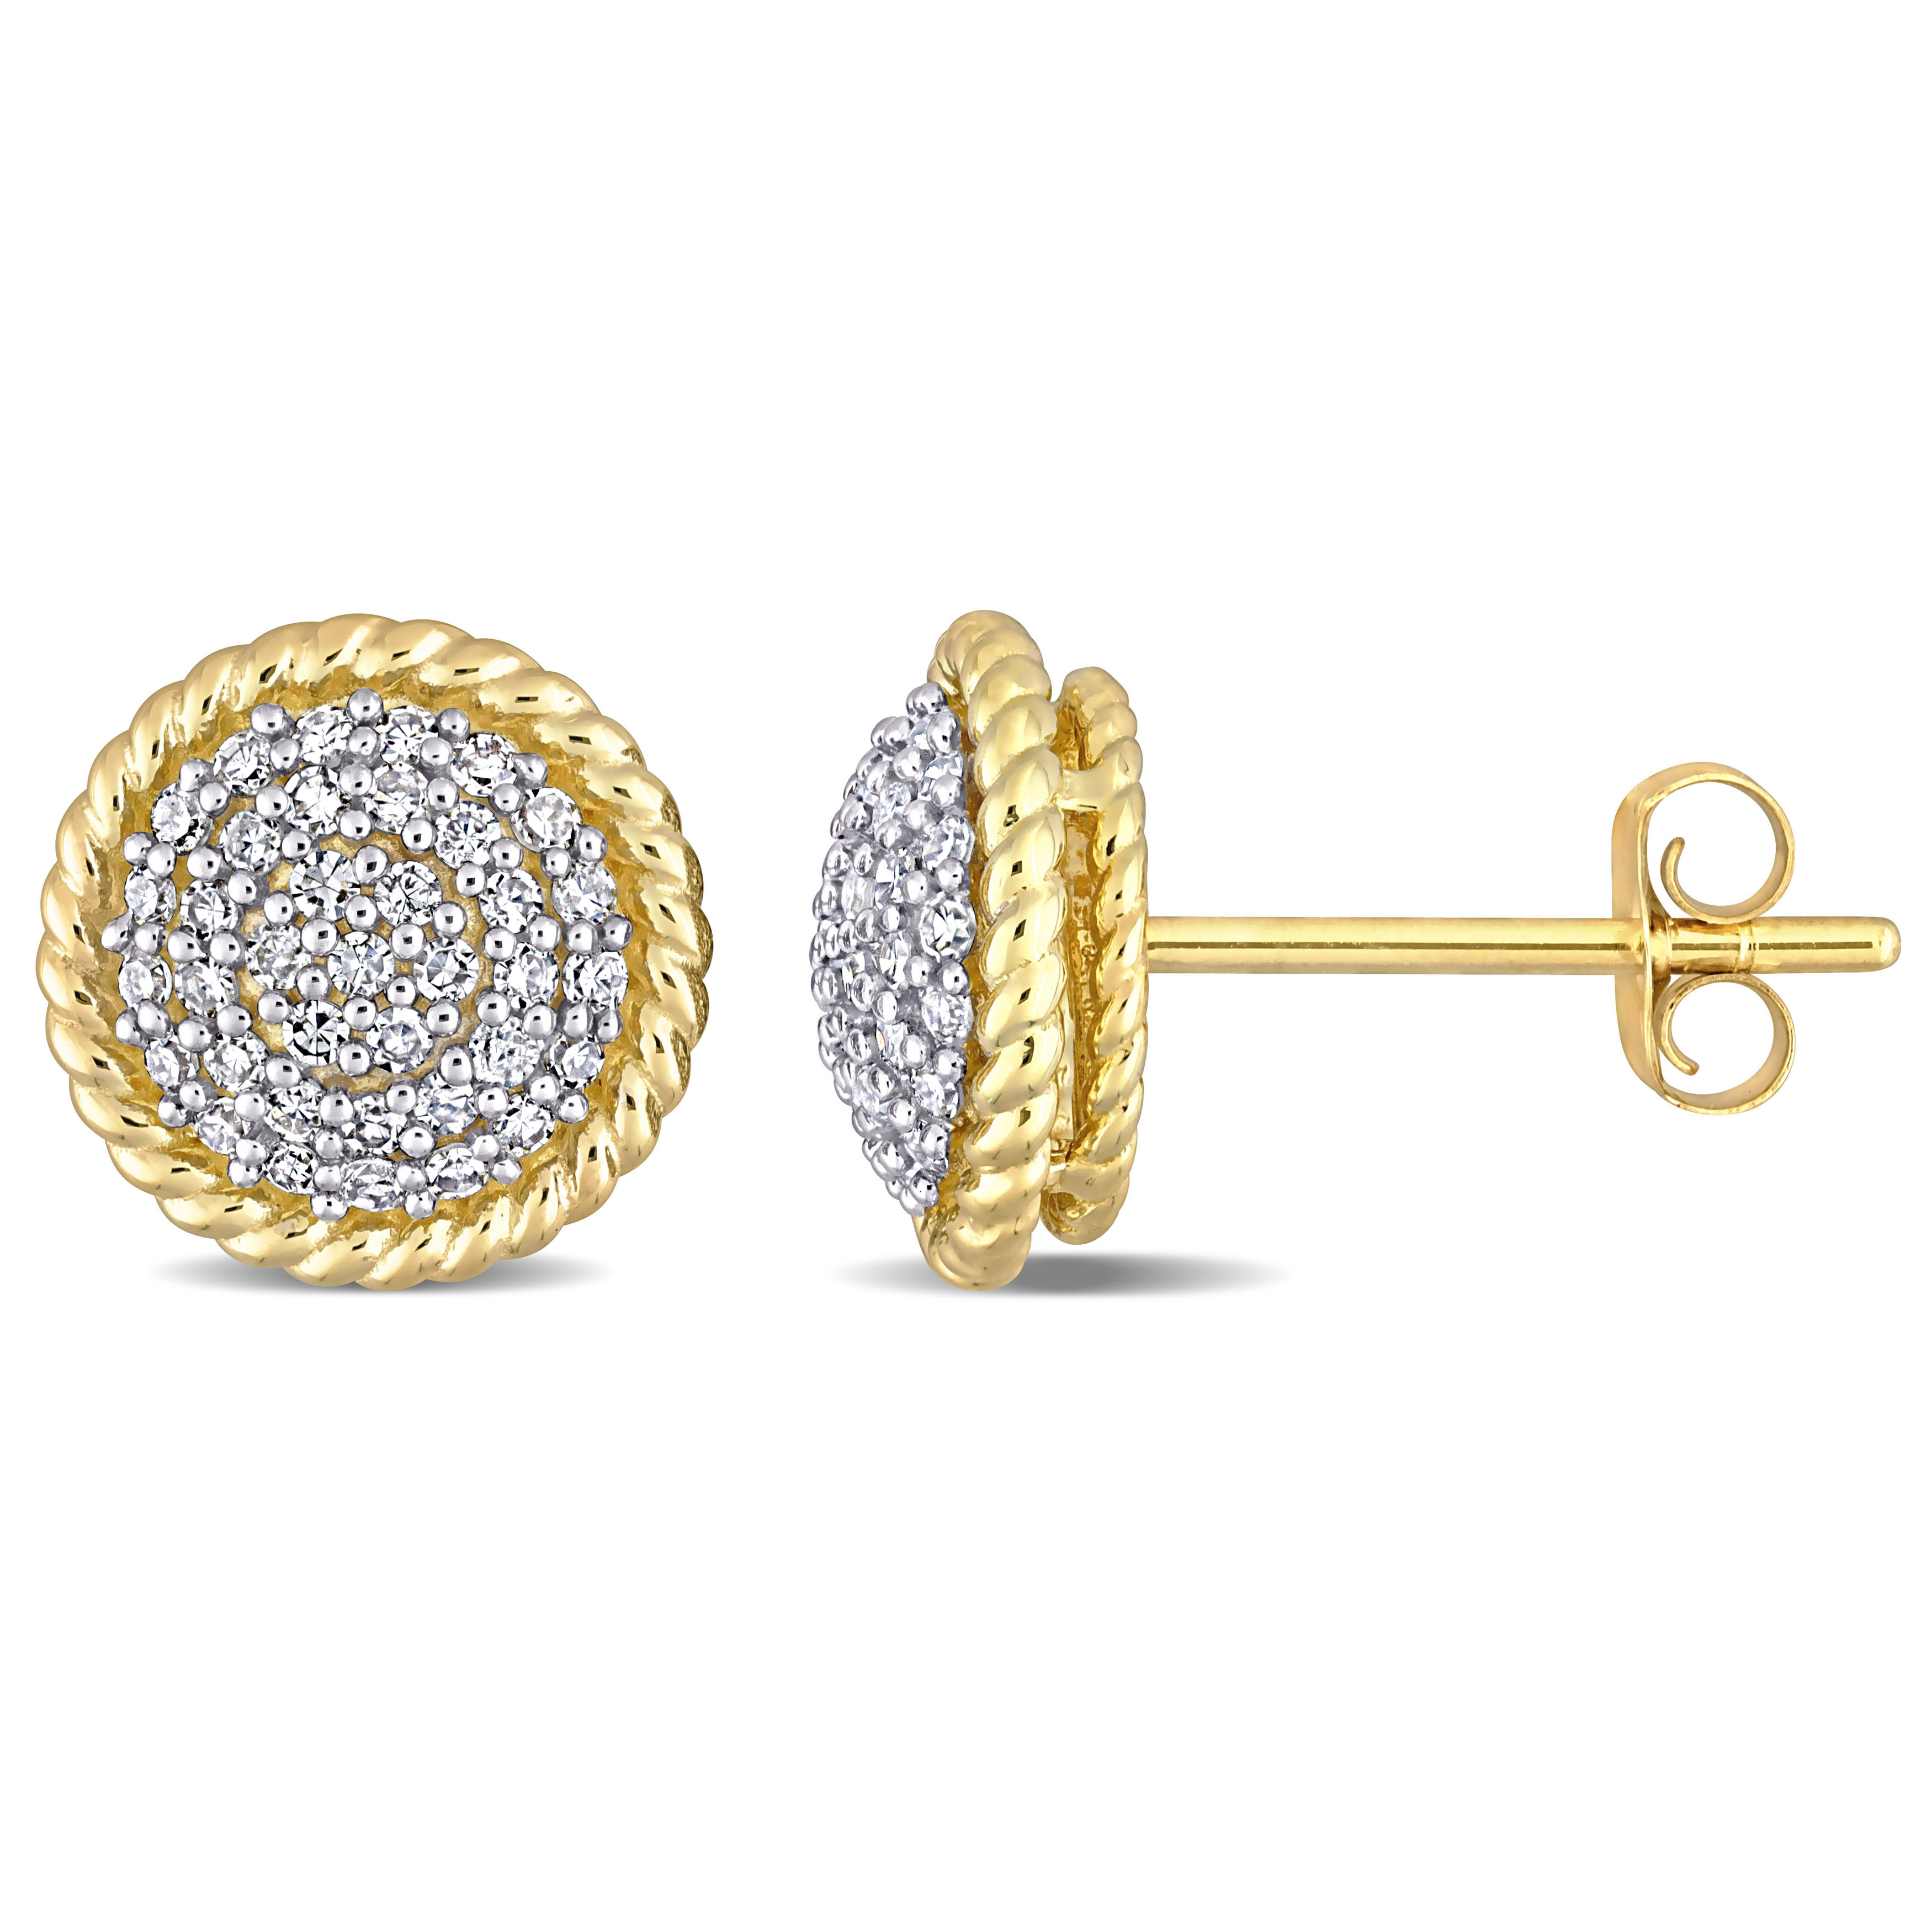 1/3 CT TW Diamond Pave Stud Earrings in 10k Yellow Gold